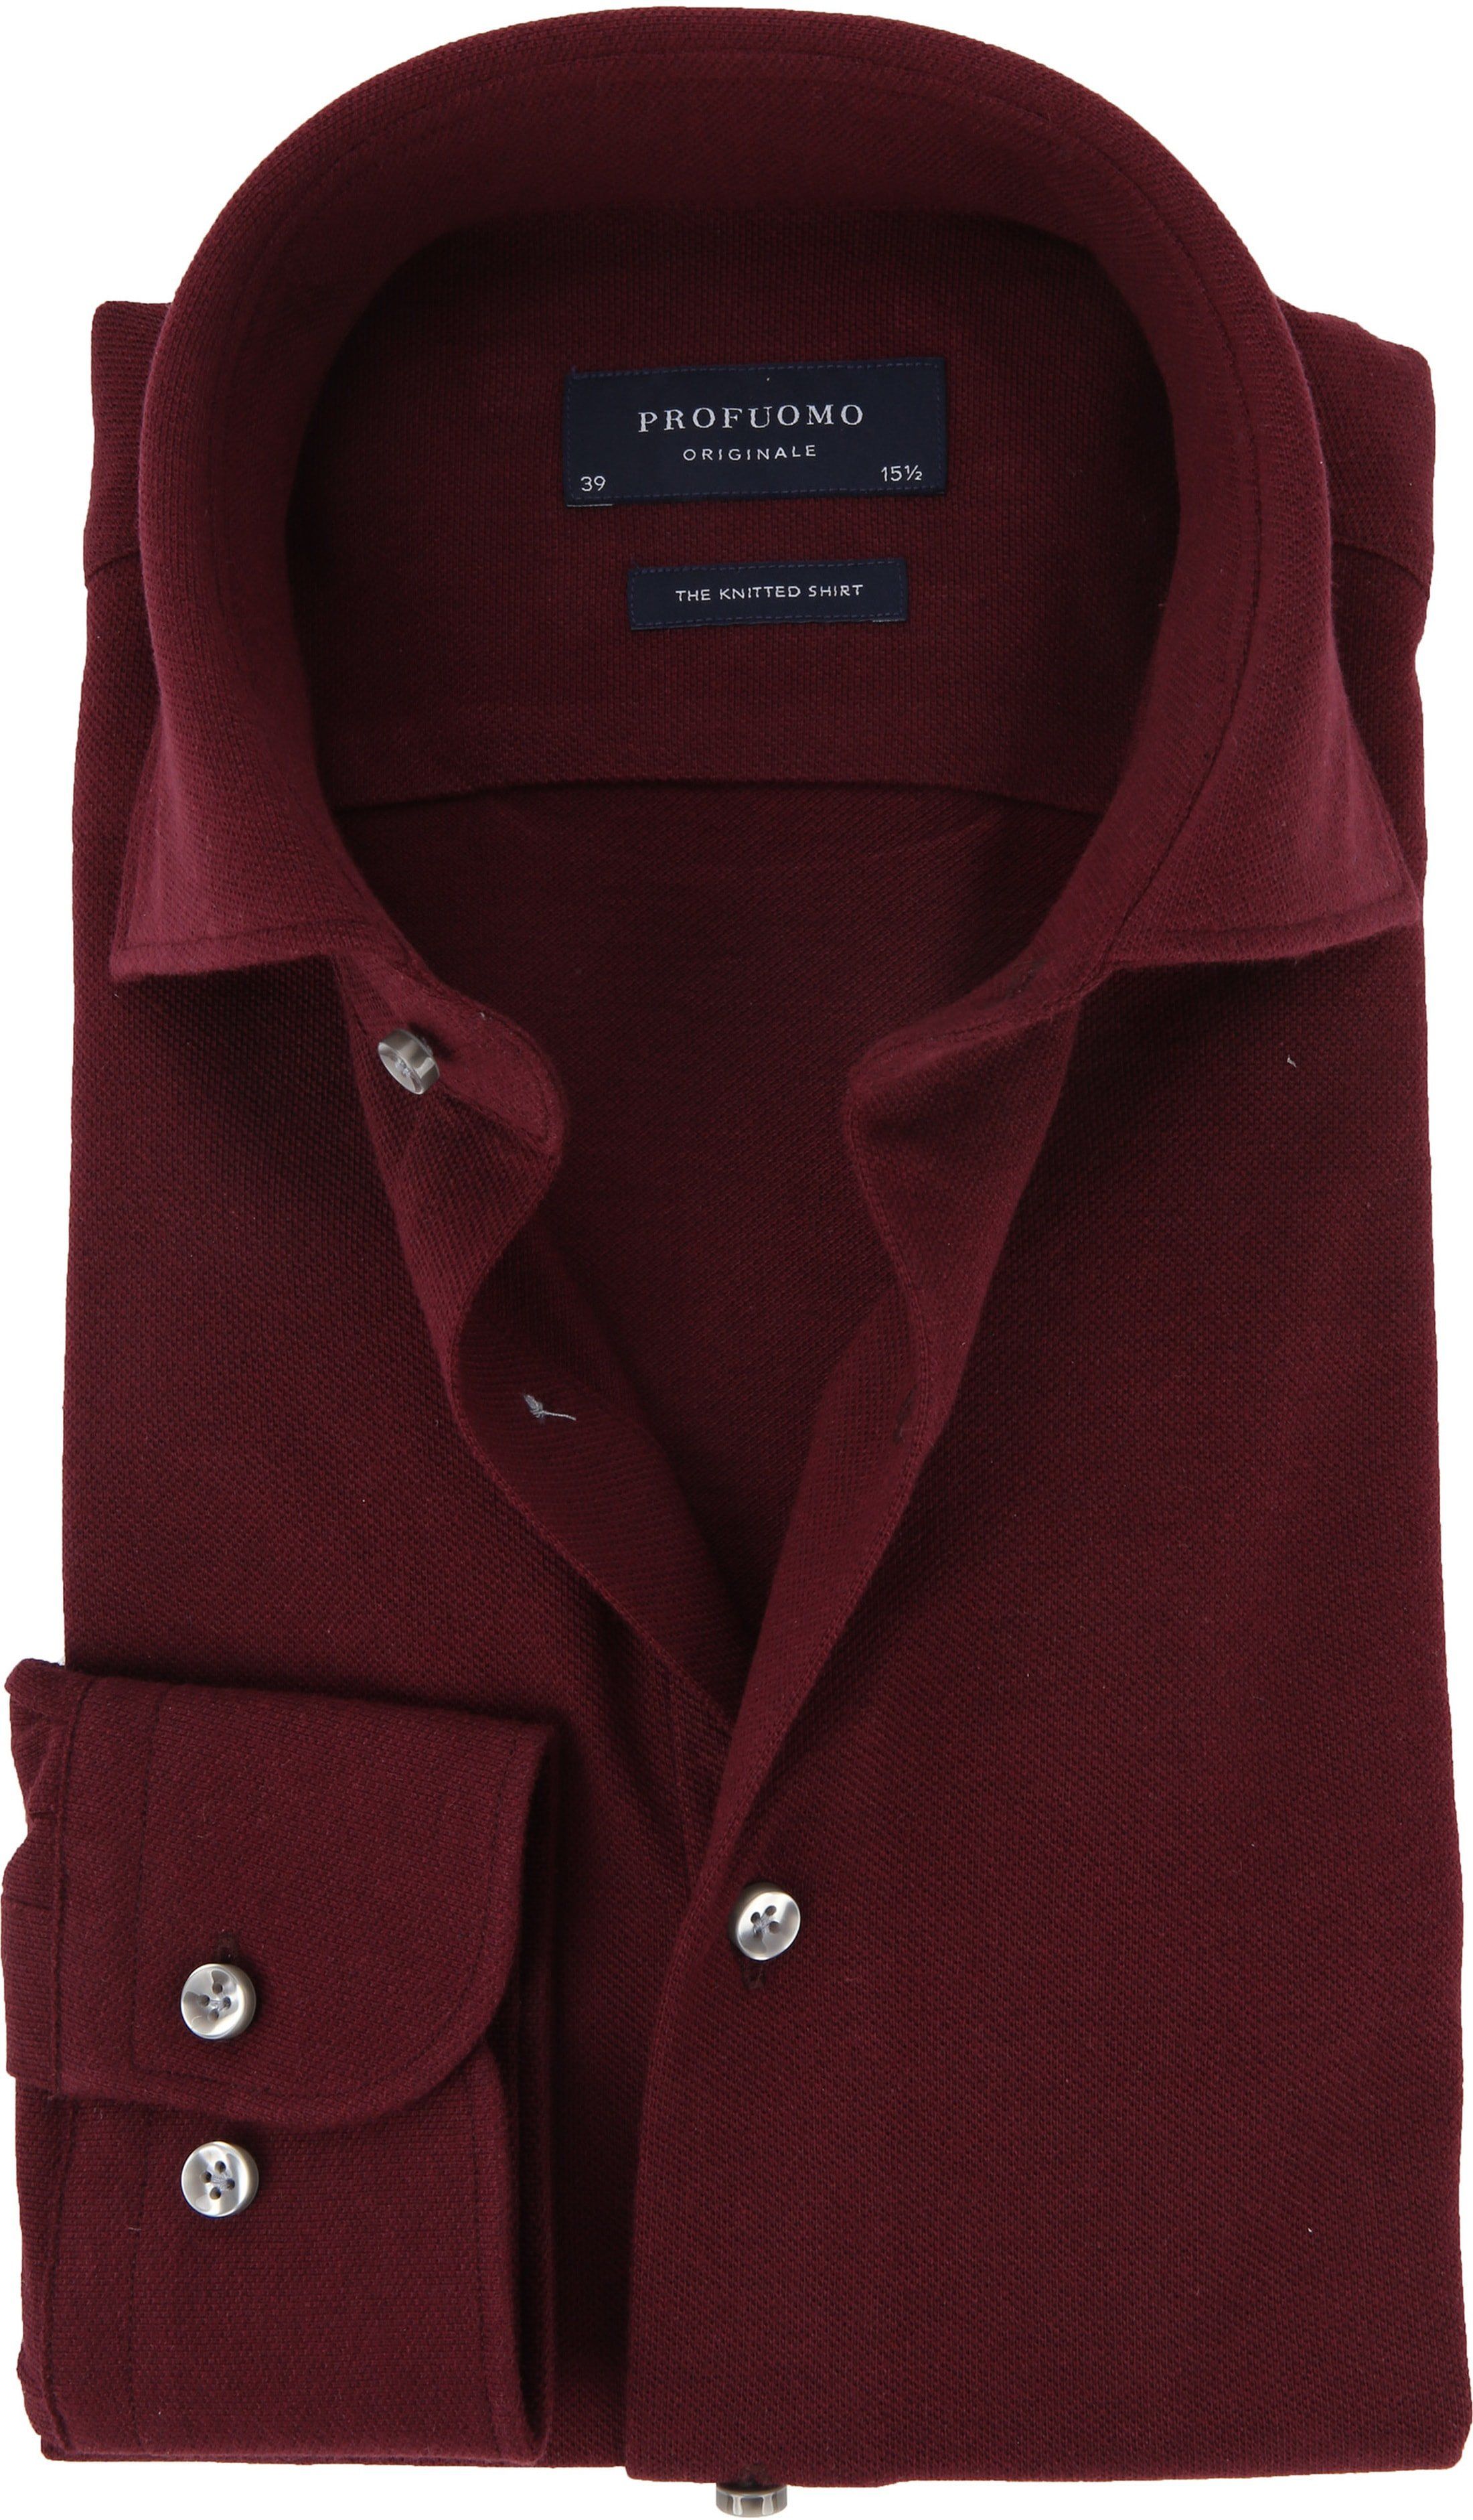 Profuomo Shirt Knitted Bordeaux Burgundy size 15